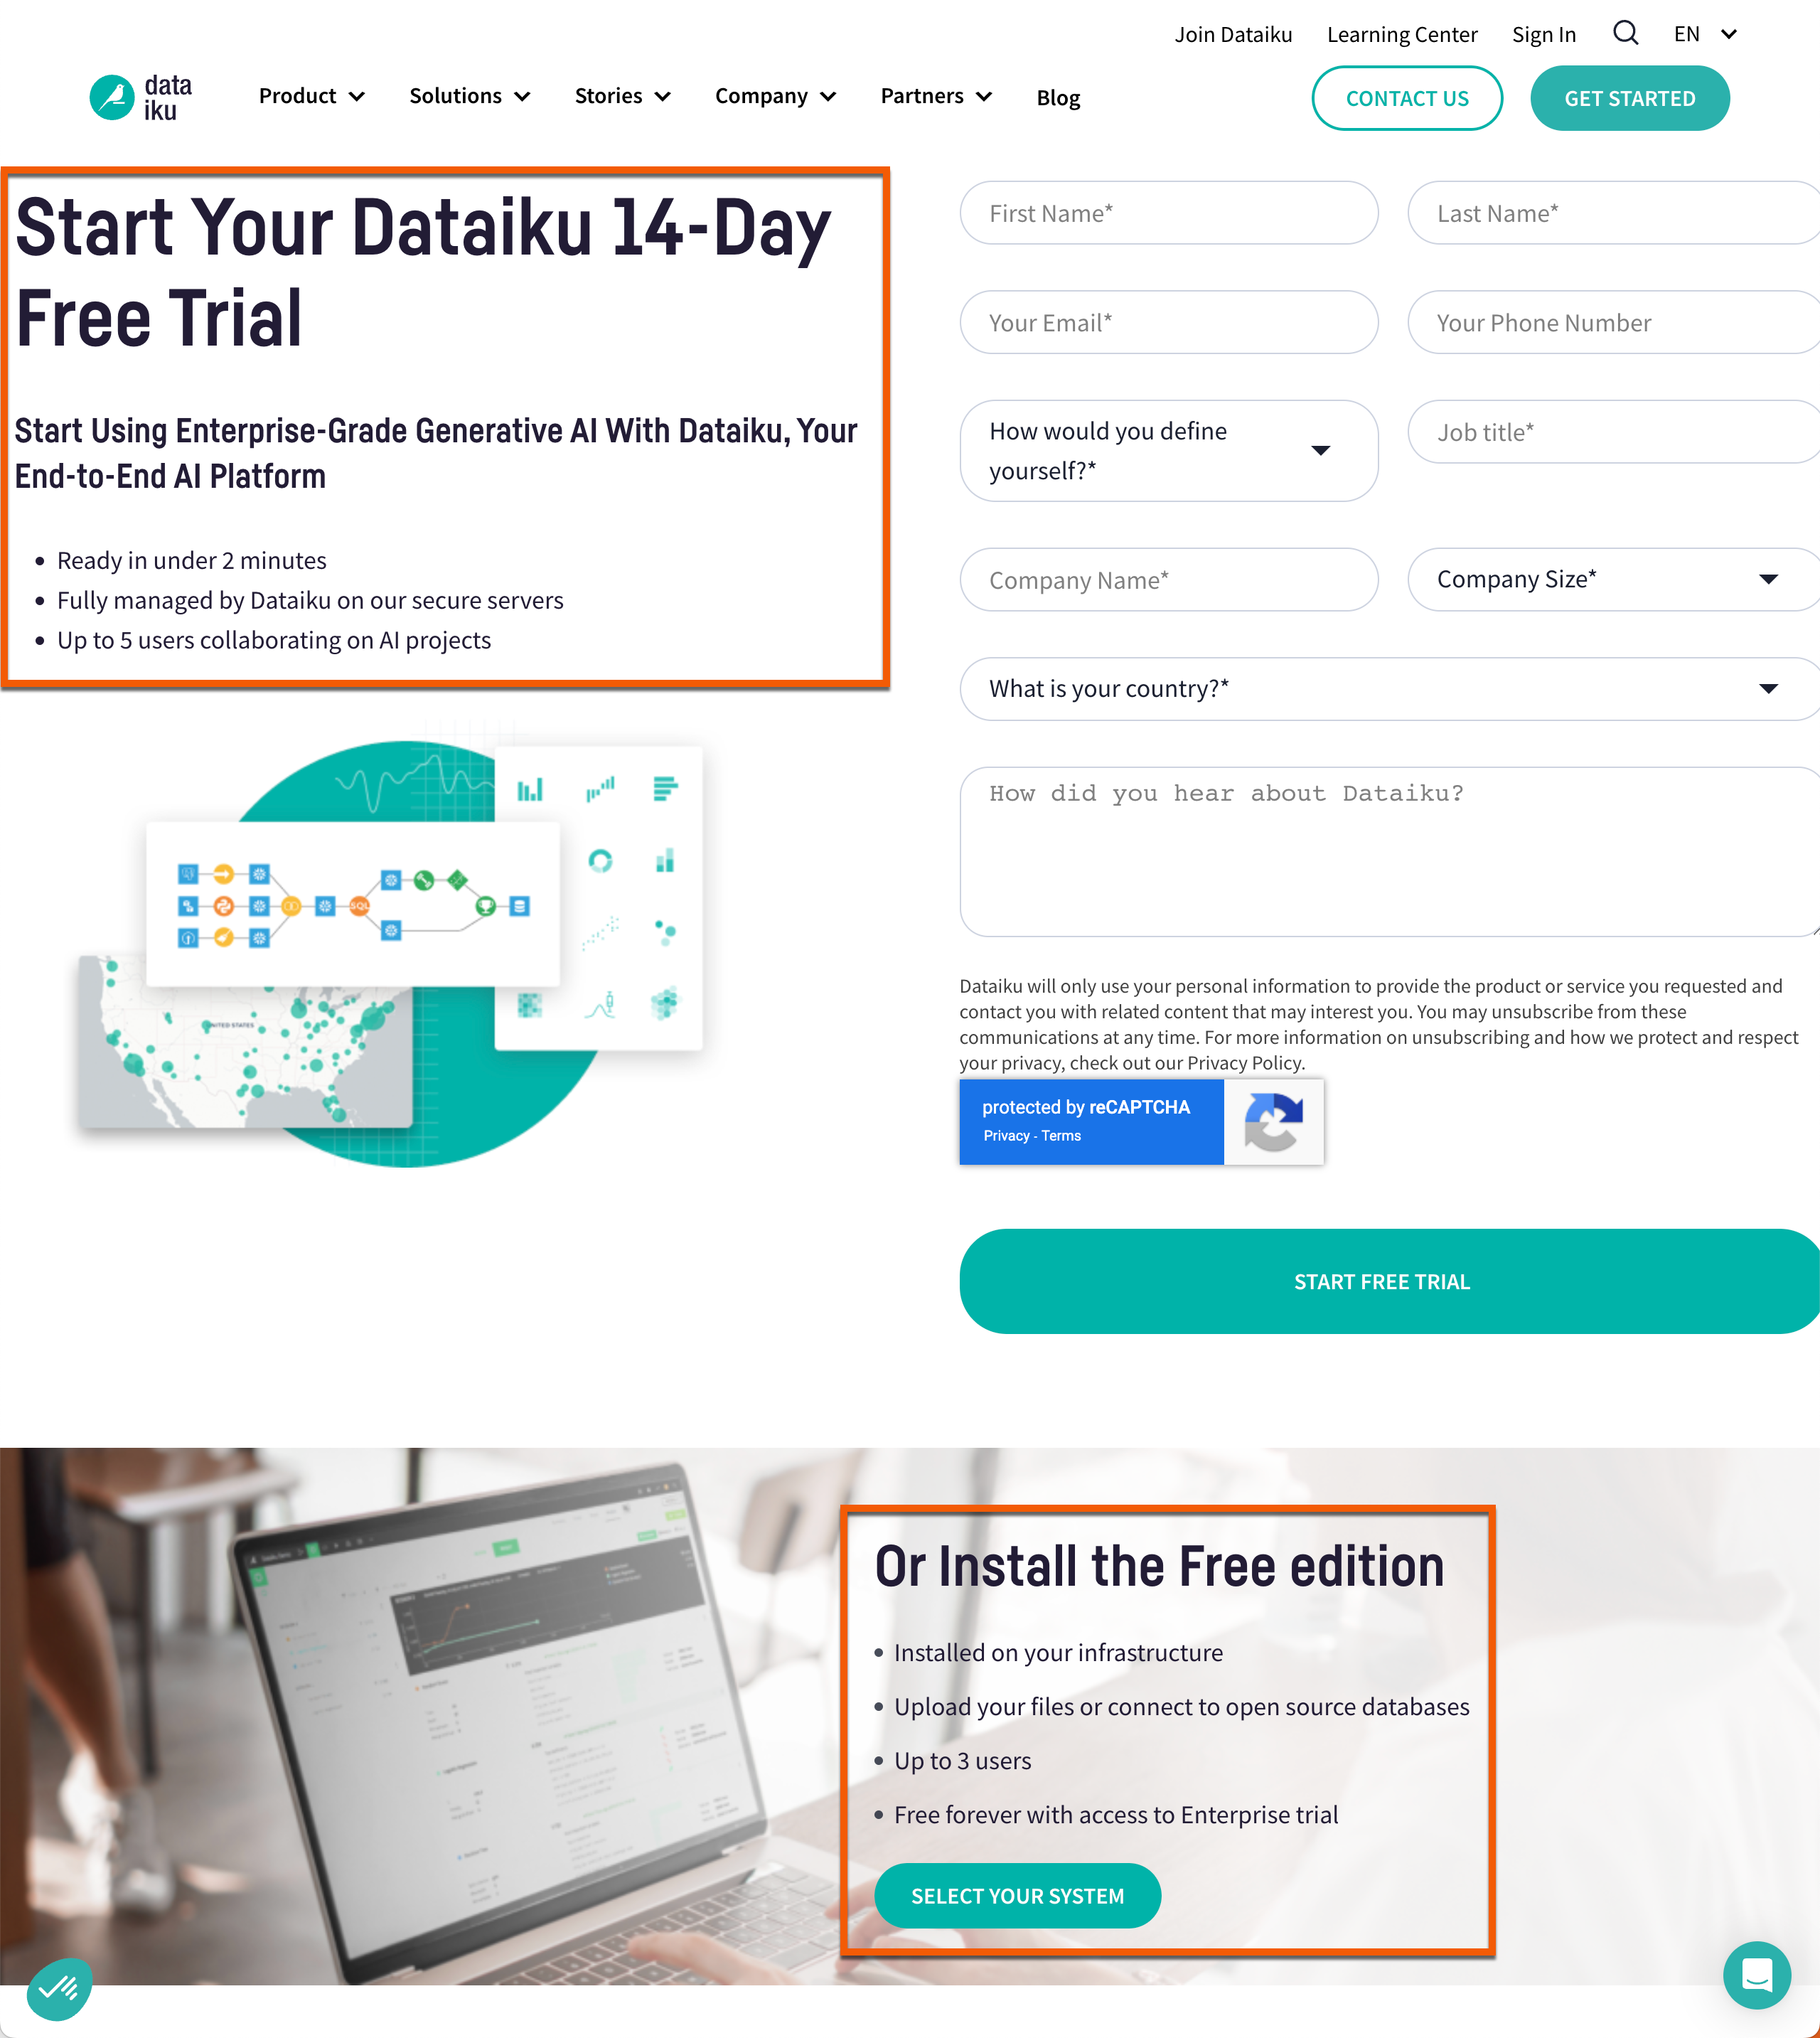 Sign-up page from the Dataiku website to start a free trial or install the free edition.